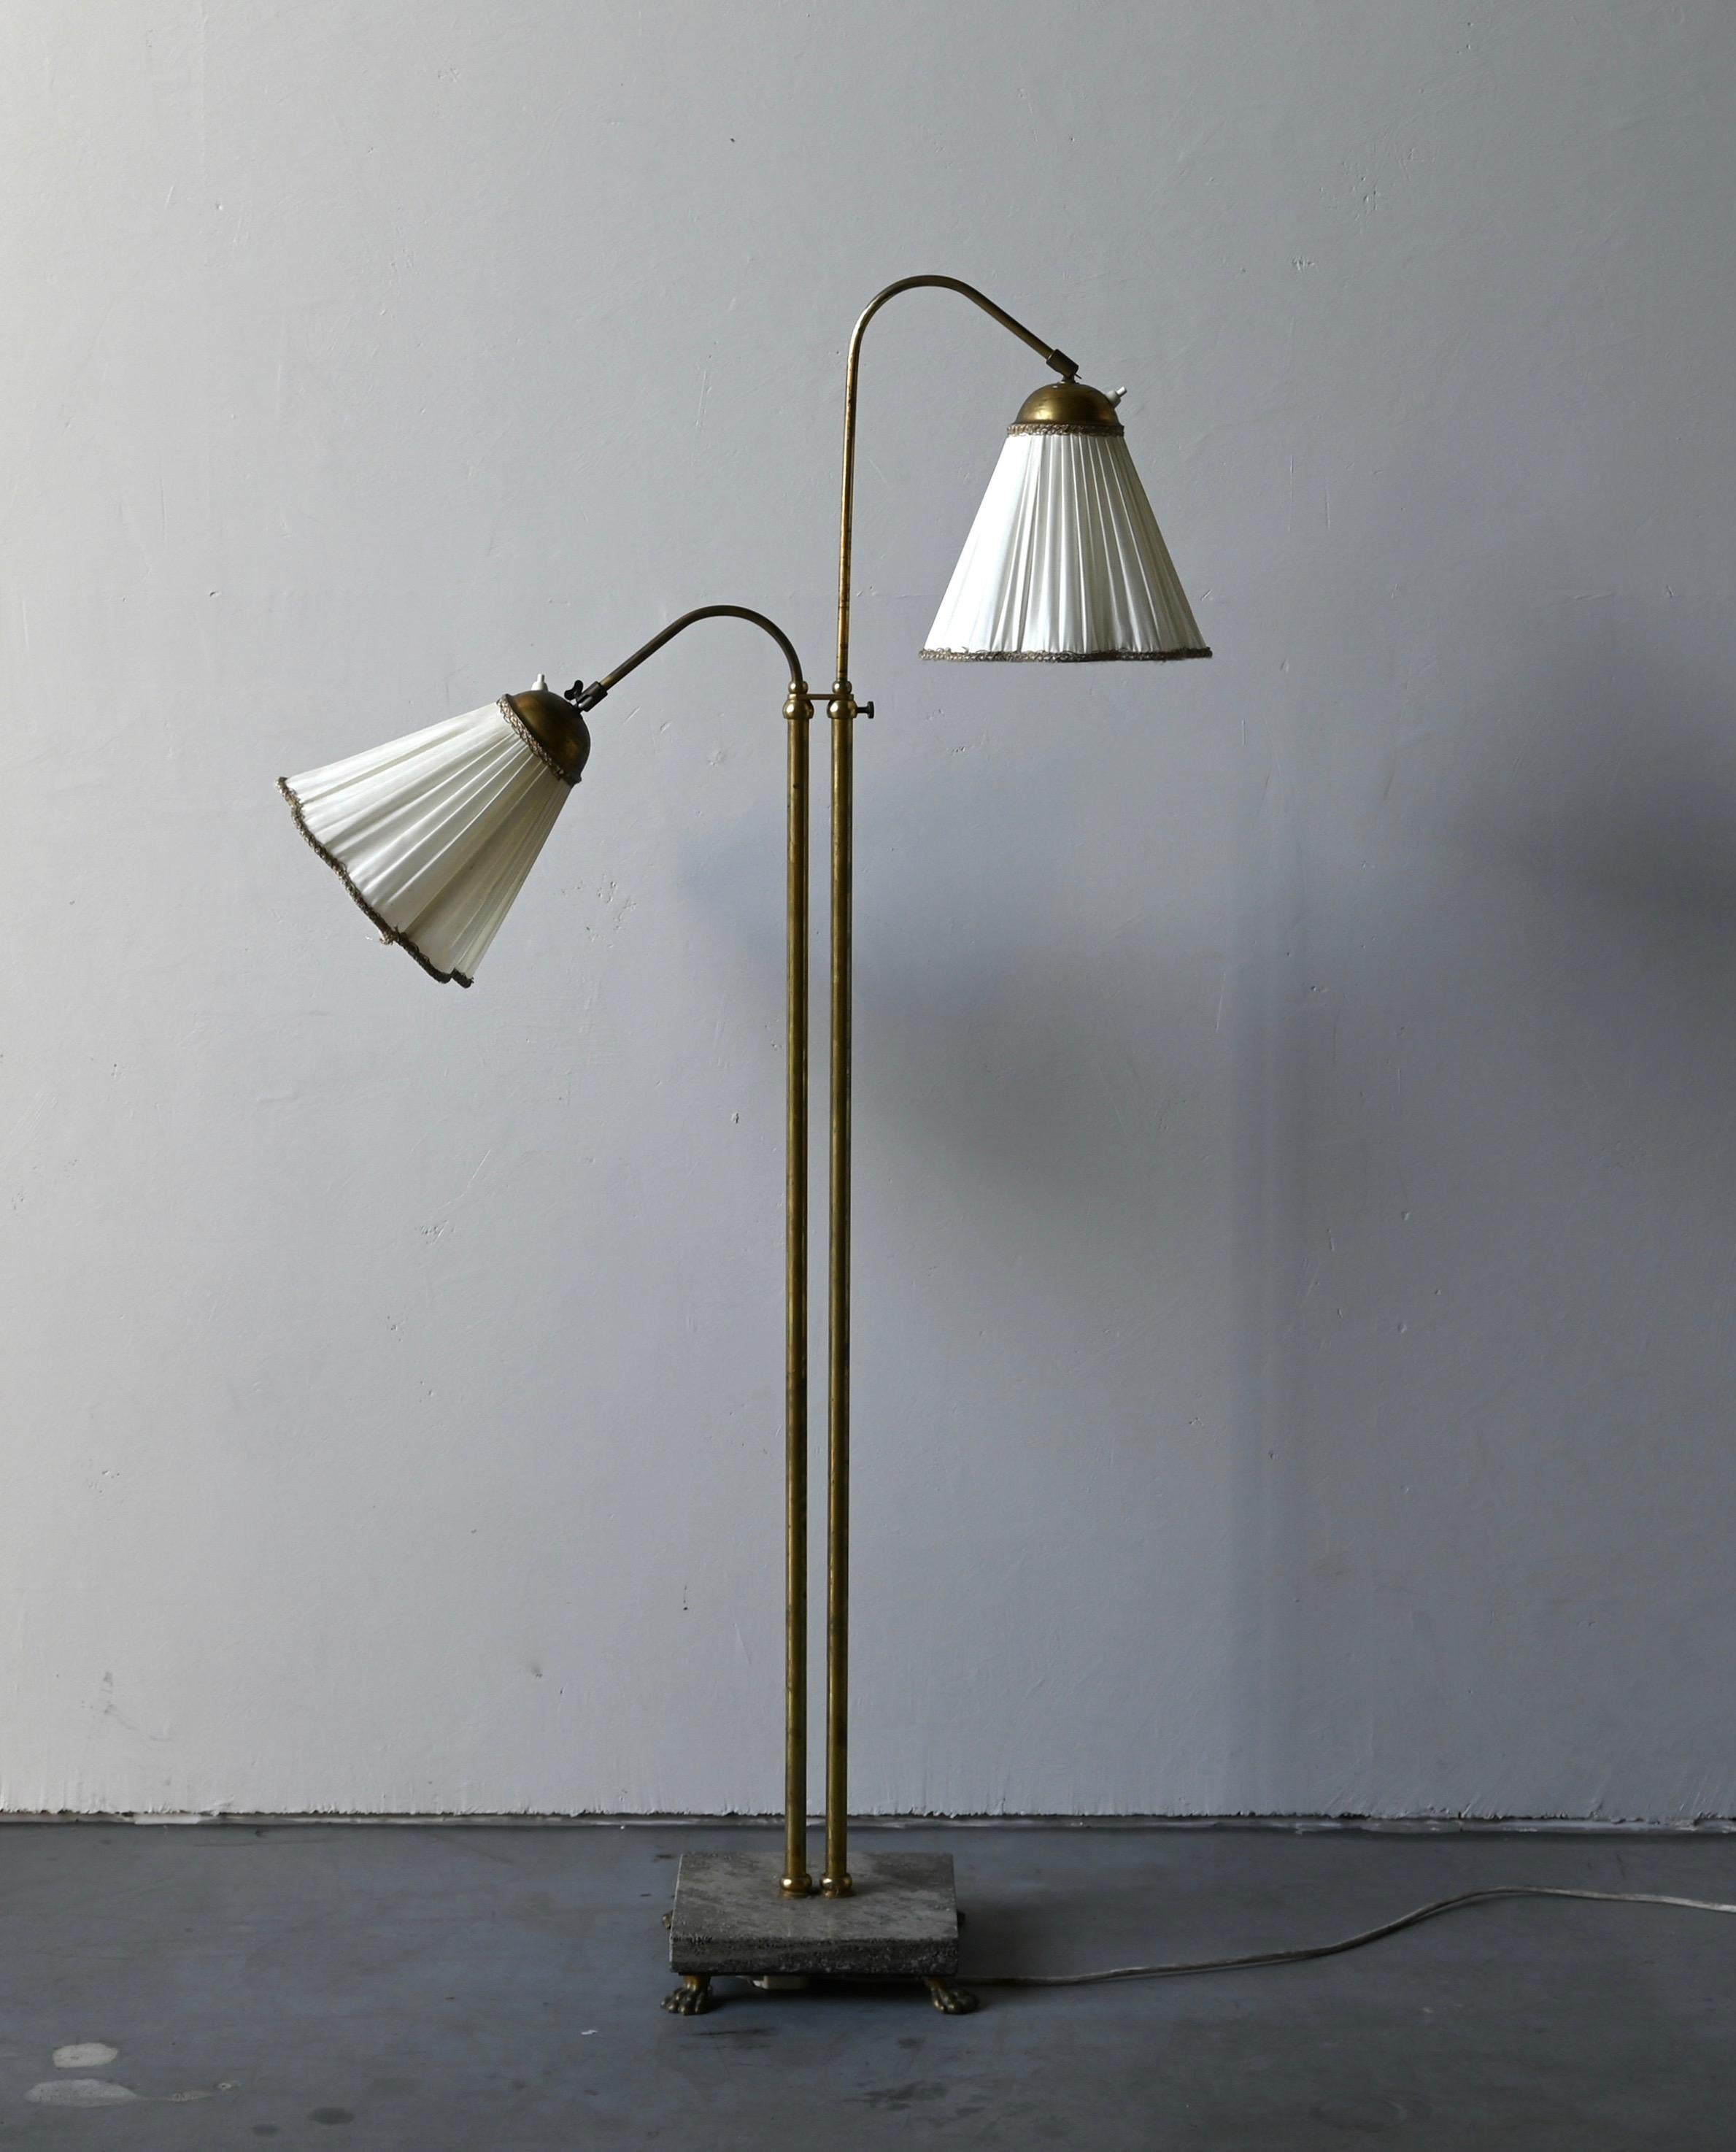 An adjustable floor lamp. Designed and produced in Sweden, 1940s. Brass with heavy marble base. Vintage lampshades.